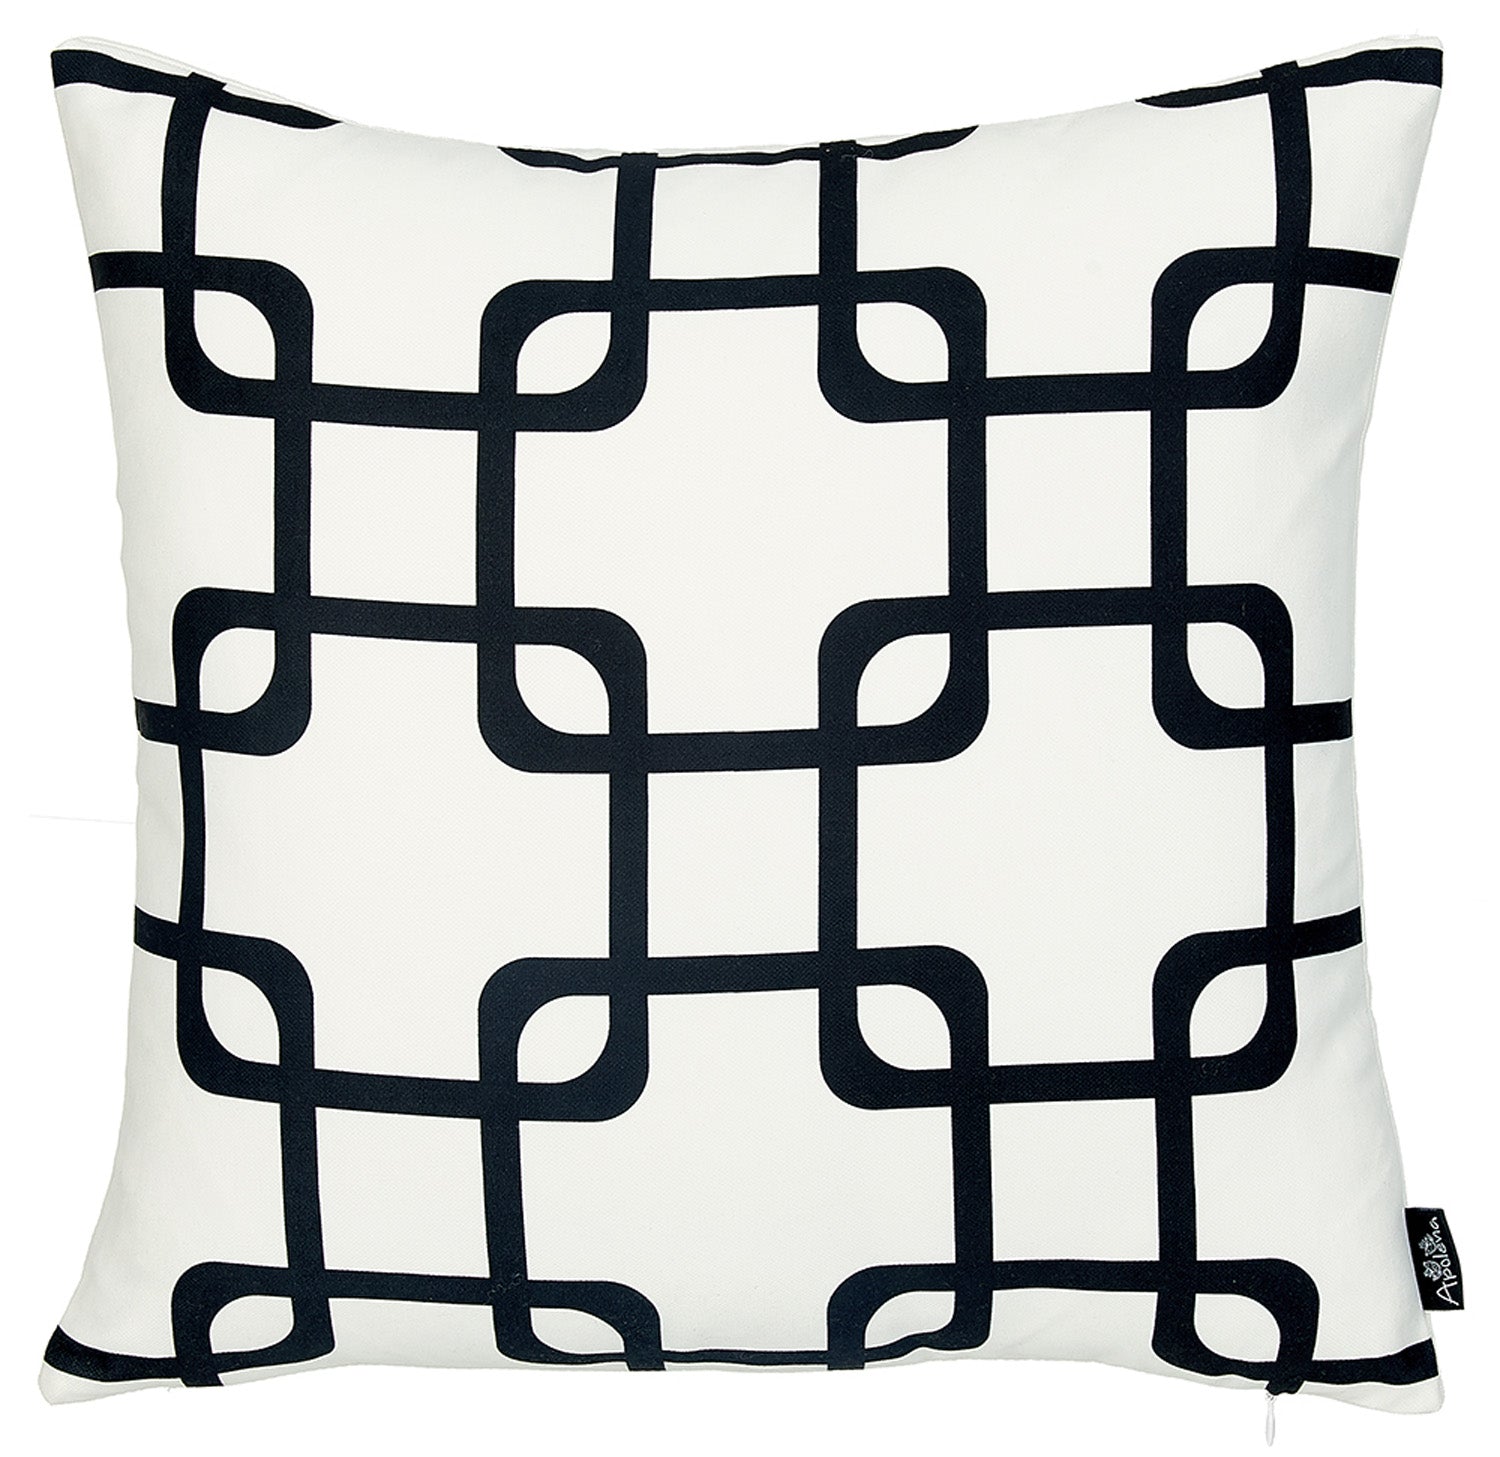 Black And White Geometric Squares Decorative Throw Pillow Cover